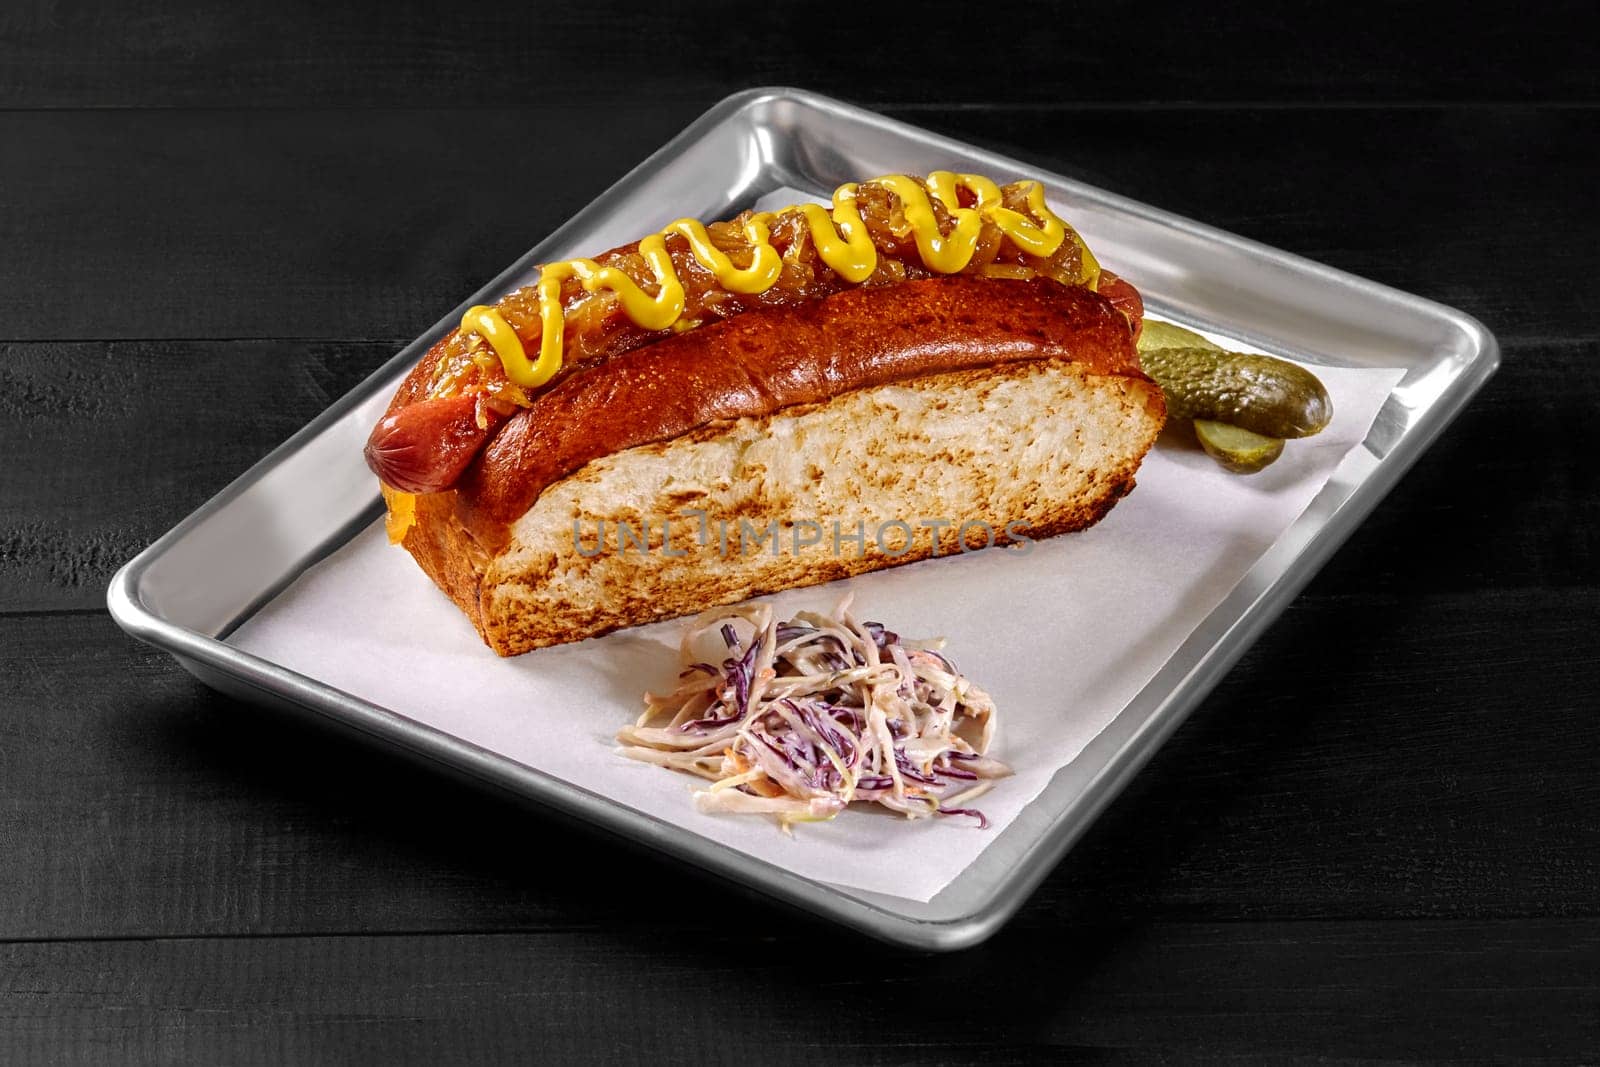 Delicious hot dog in toasted brioche sandwich bread with smoked sausage, caramelized onions and mustard sauce served on metal tray with pickled gherkins and shredded cabbage. Popular snack